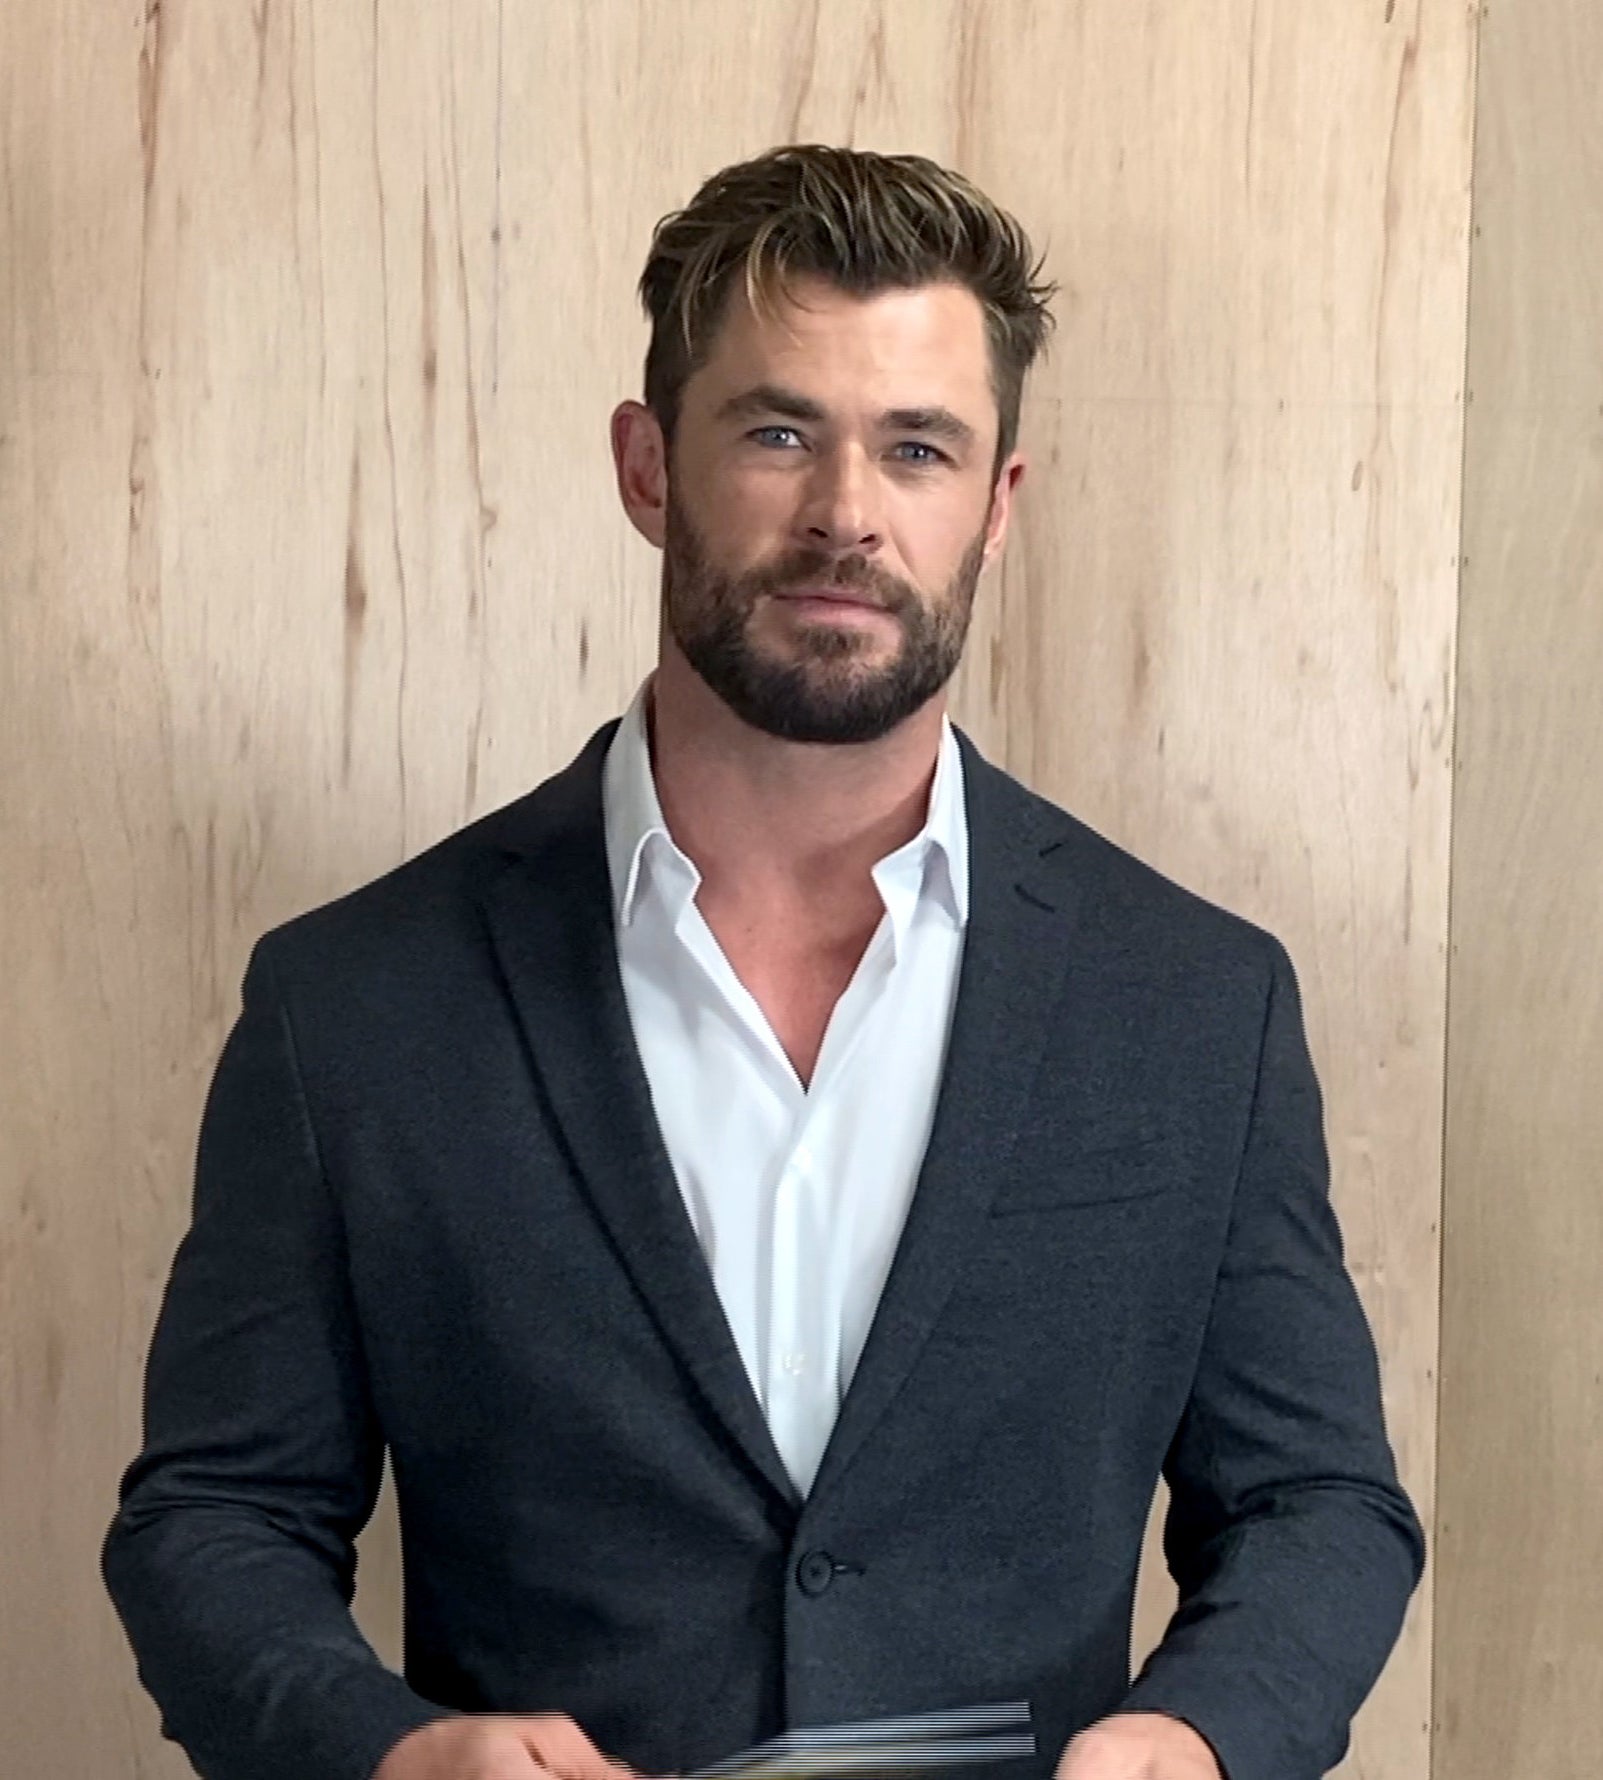 Chris Hemsworth gives a speech during the 26th Annual Critics Choice Awards in March 2021